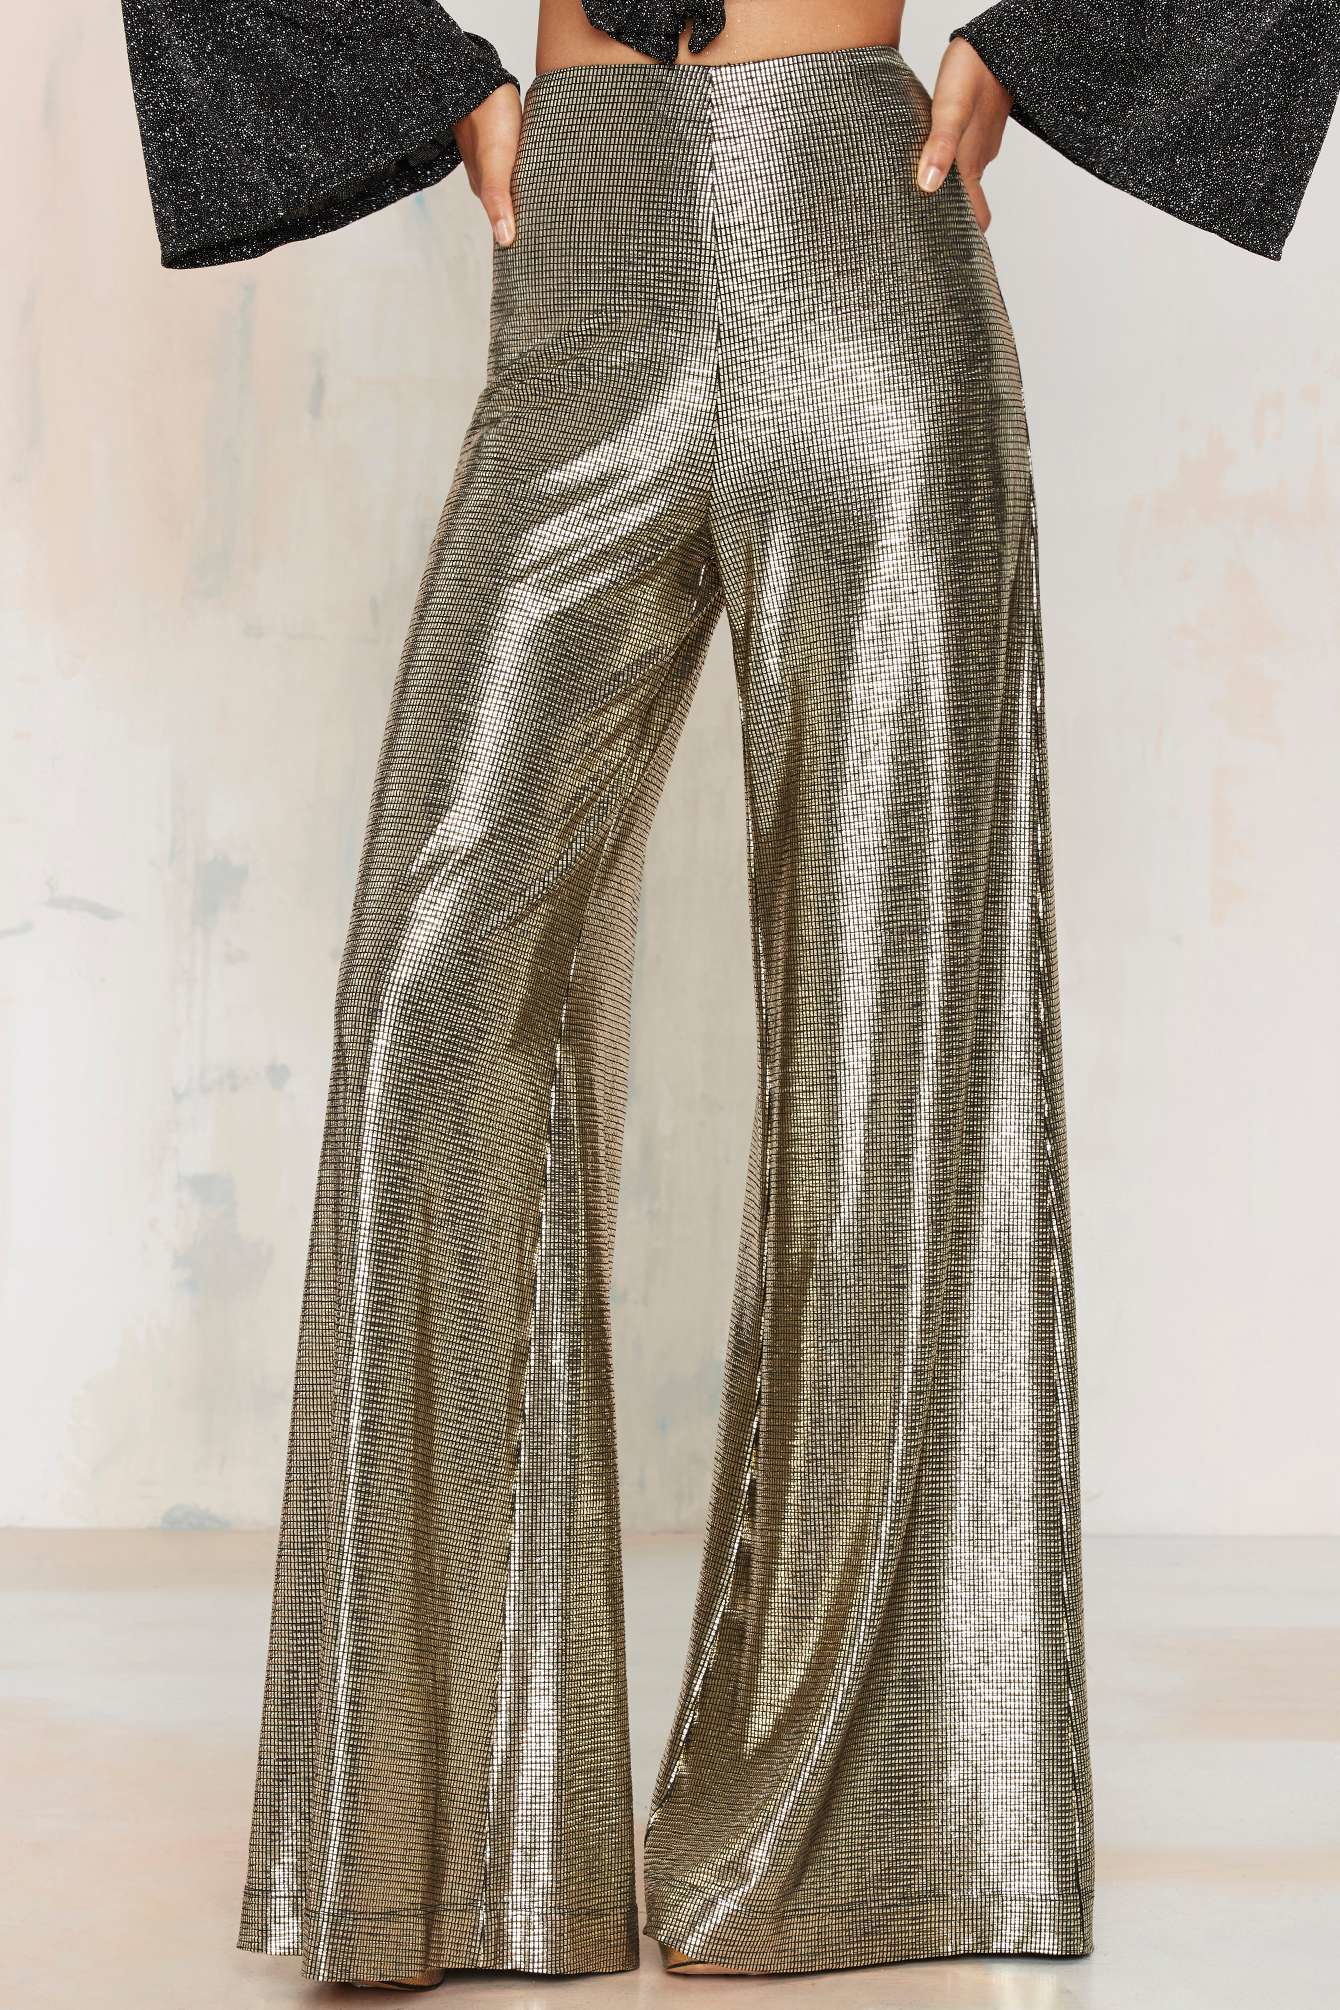 Lyst - Nasty Gal Hot And Gold High-waisted Metallic Pants in Metallic